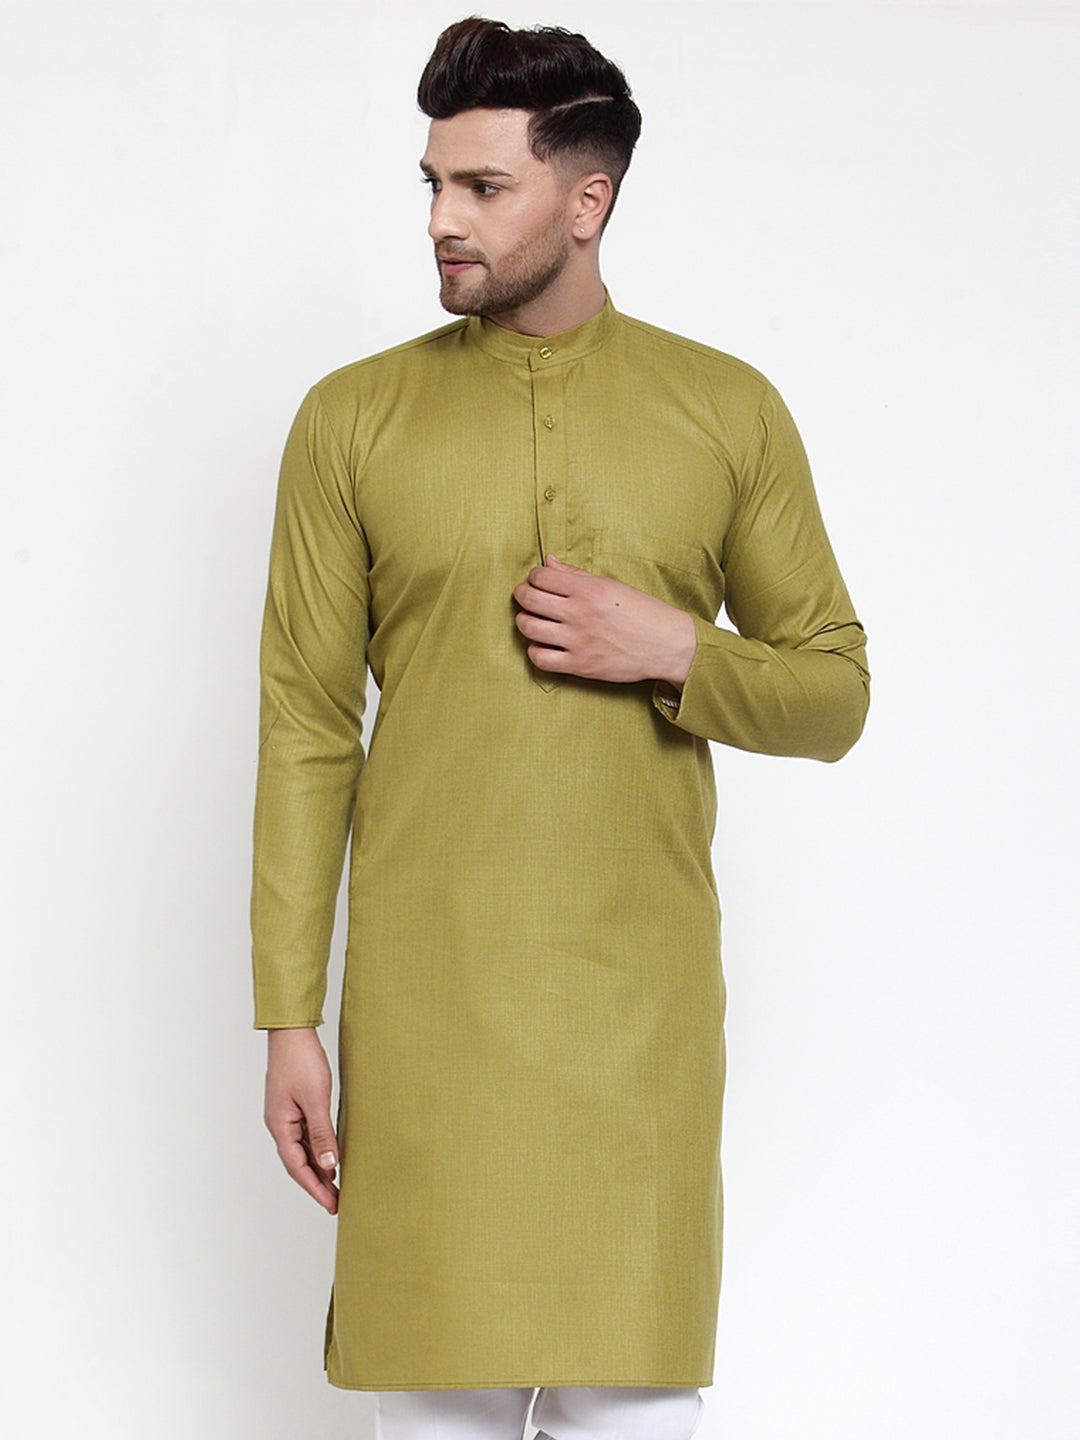 Jompers Men Olive Green & White Solid Kurta Only